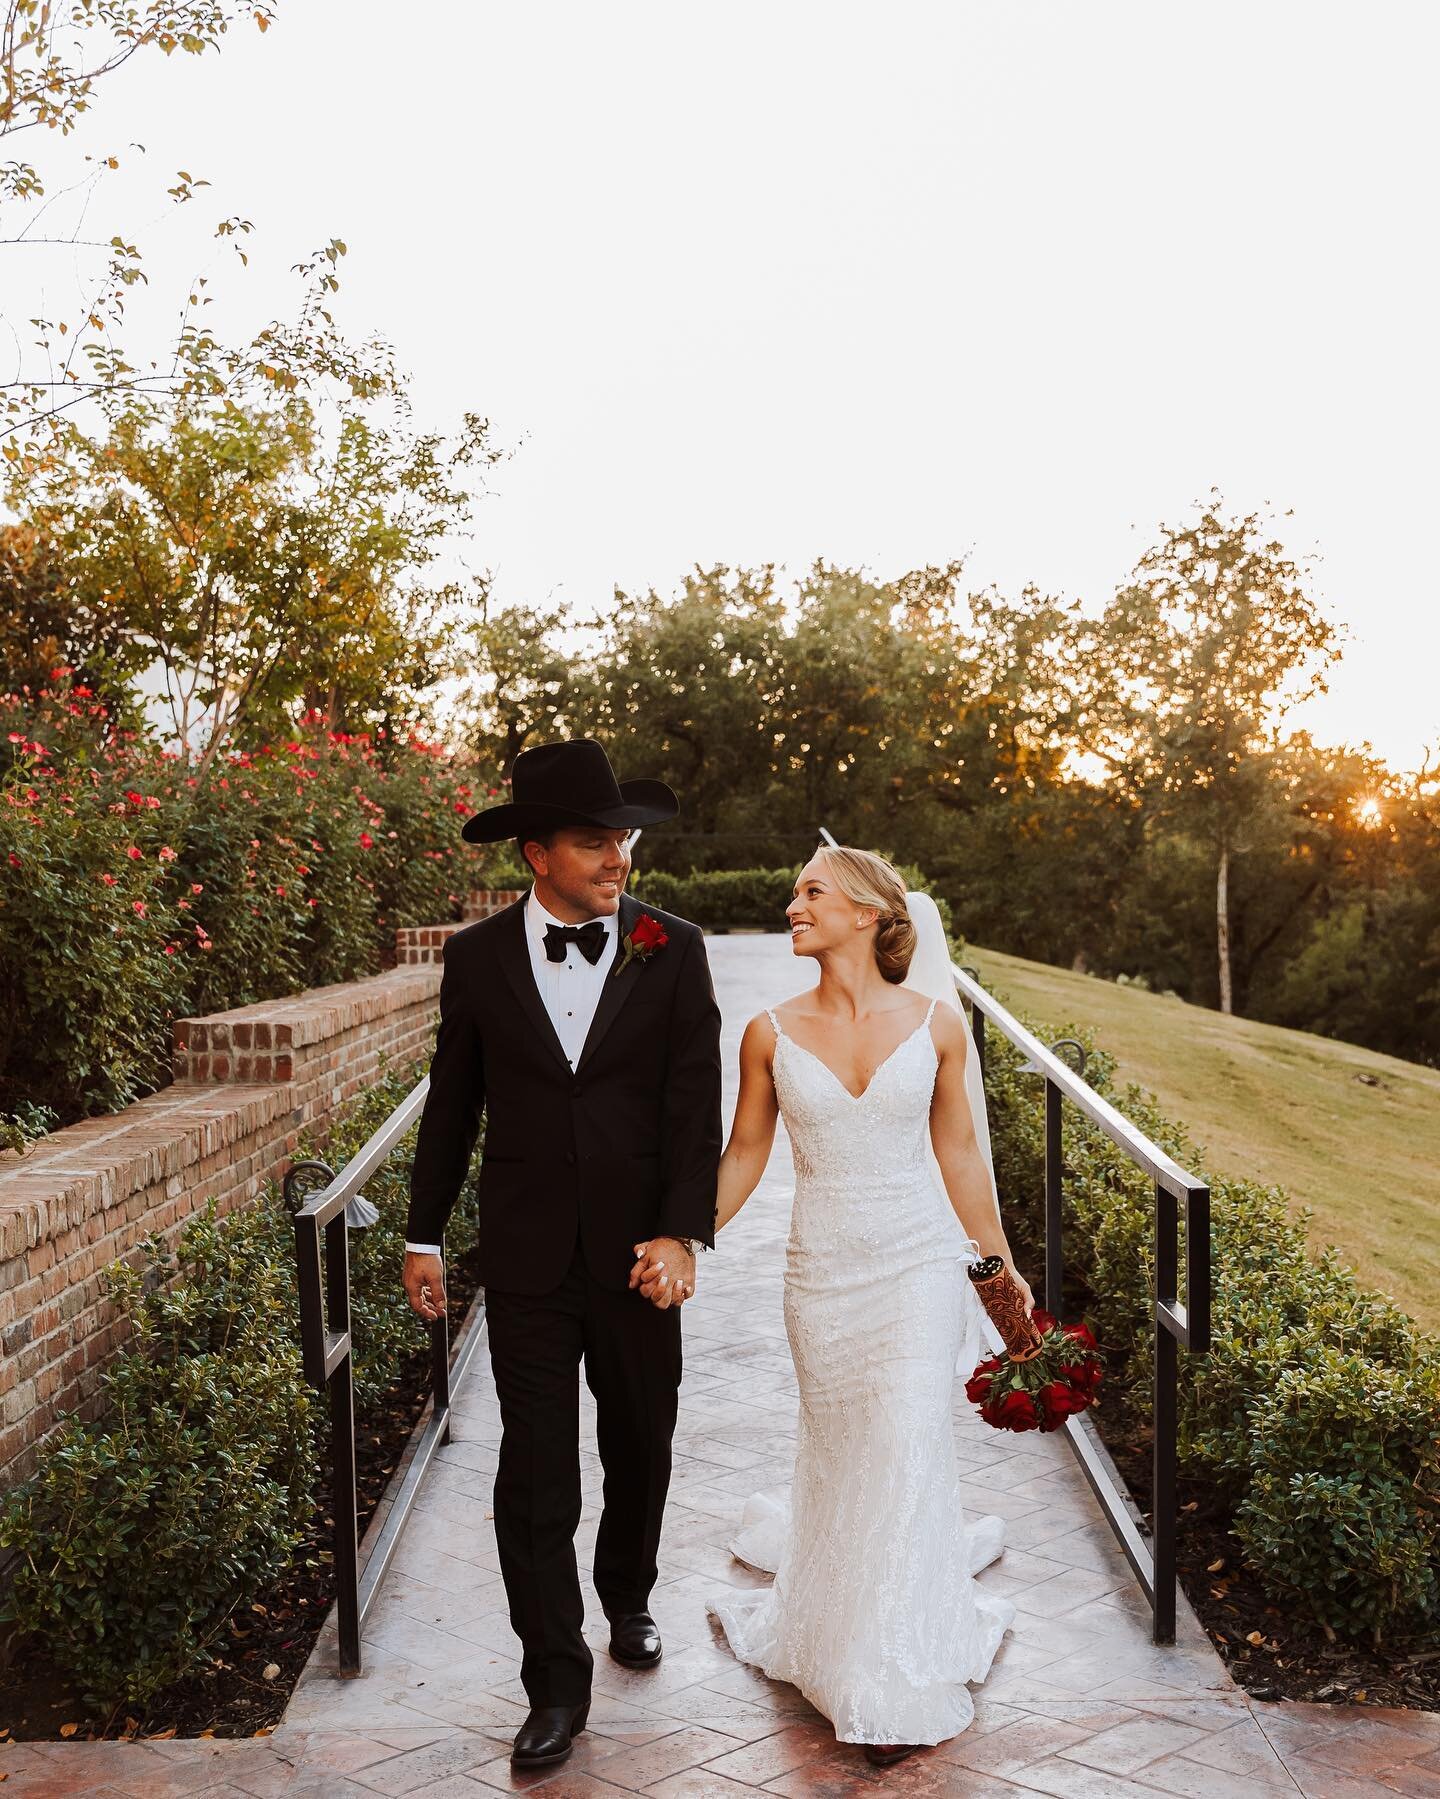 Introducing Haley + Koby Tuck✨
I&rsquo;m finally home after a week of shoots in Sanger / Palestine / Trophy Club and a wedding in Weatherford! The wedding was absolutely BEAUTIFUL! ✨Y&rsquo;all checkout The Springs Venue in Weatherford! 
.
.
#kristaf